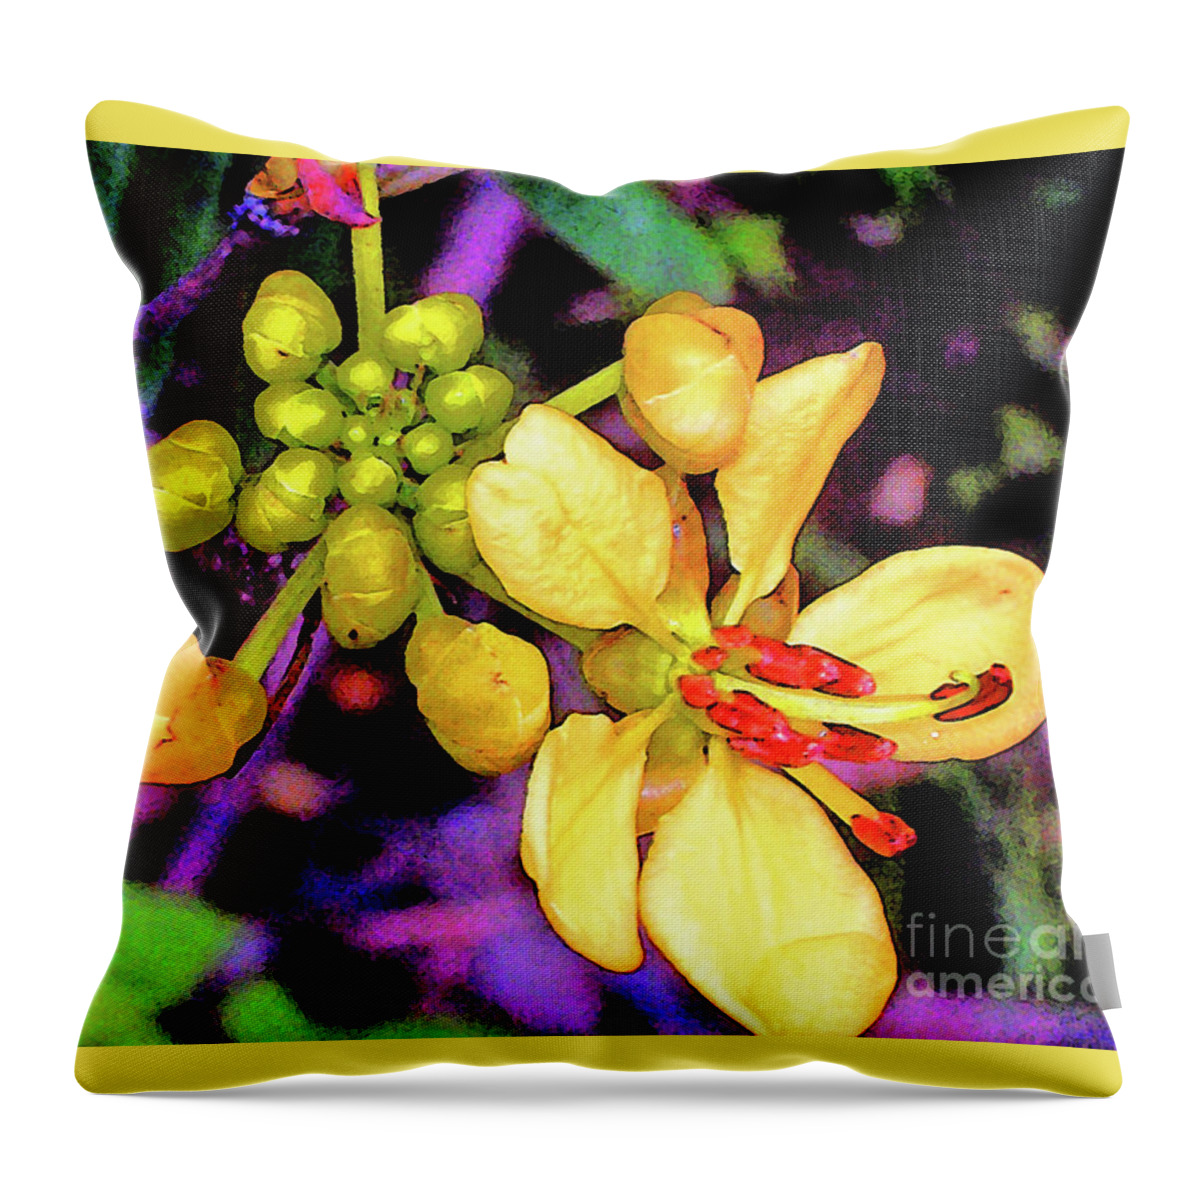 Flowers Throw Pillow featuring the photograph In Bloom by Elizabeth Hoskinson